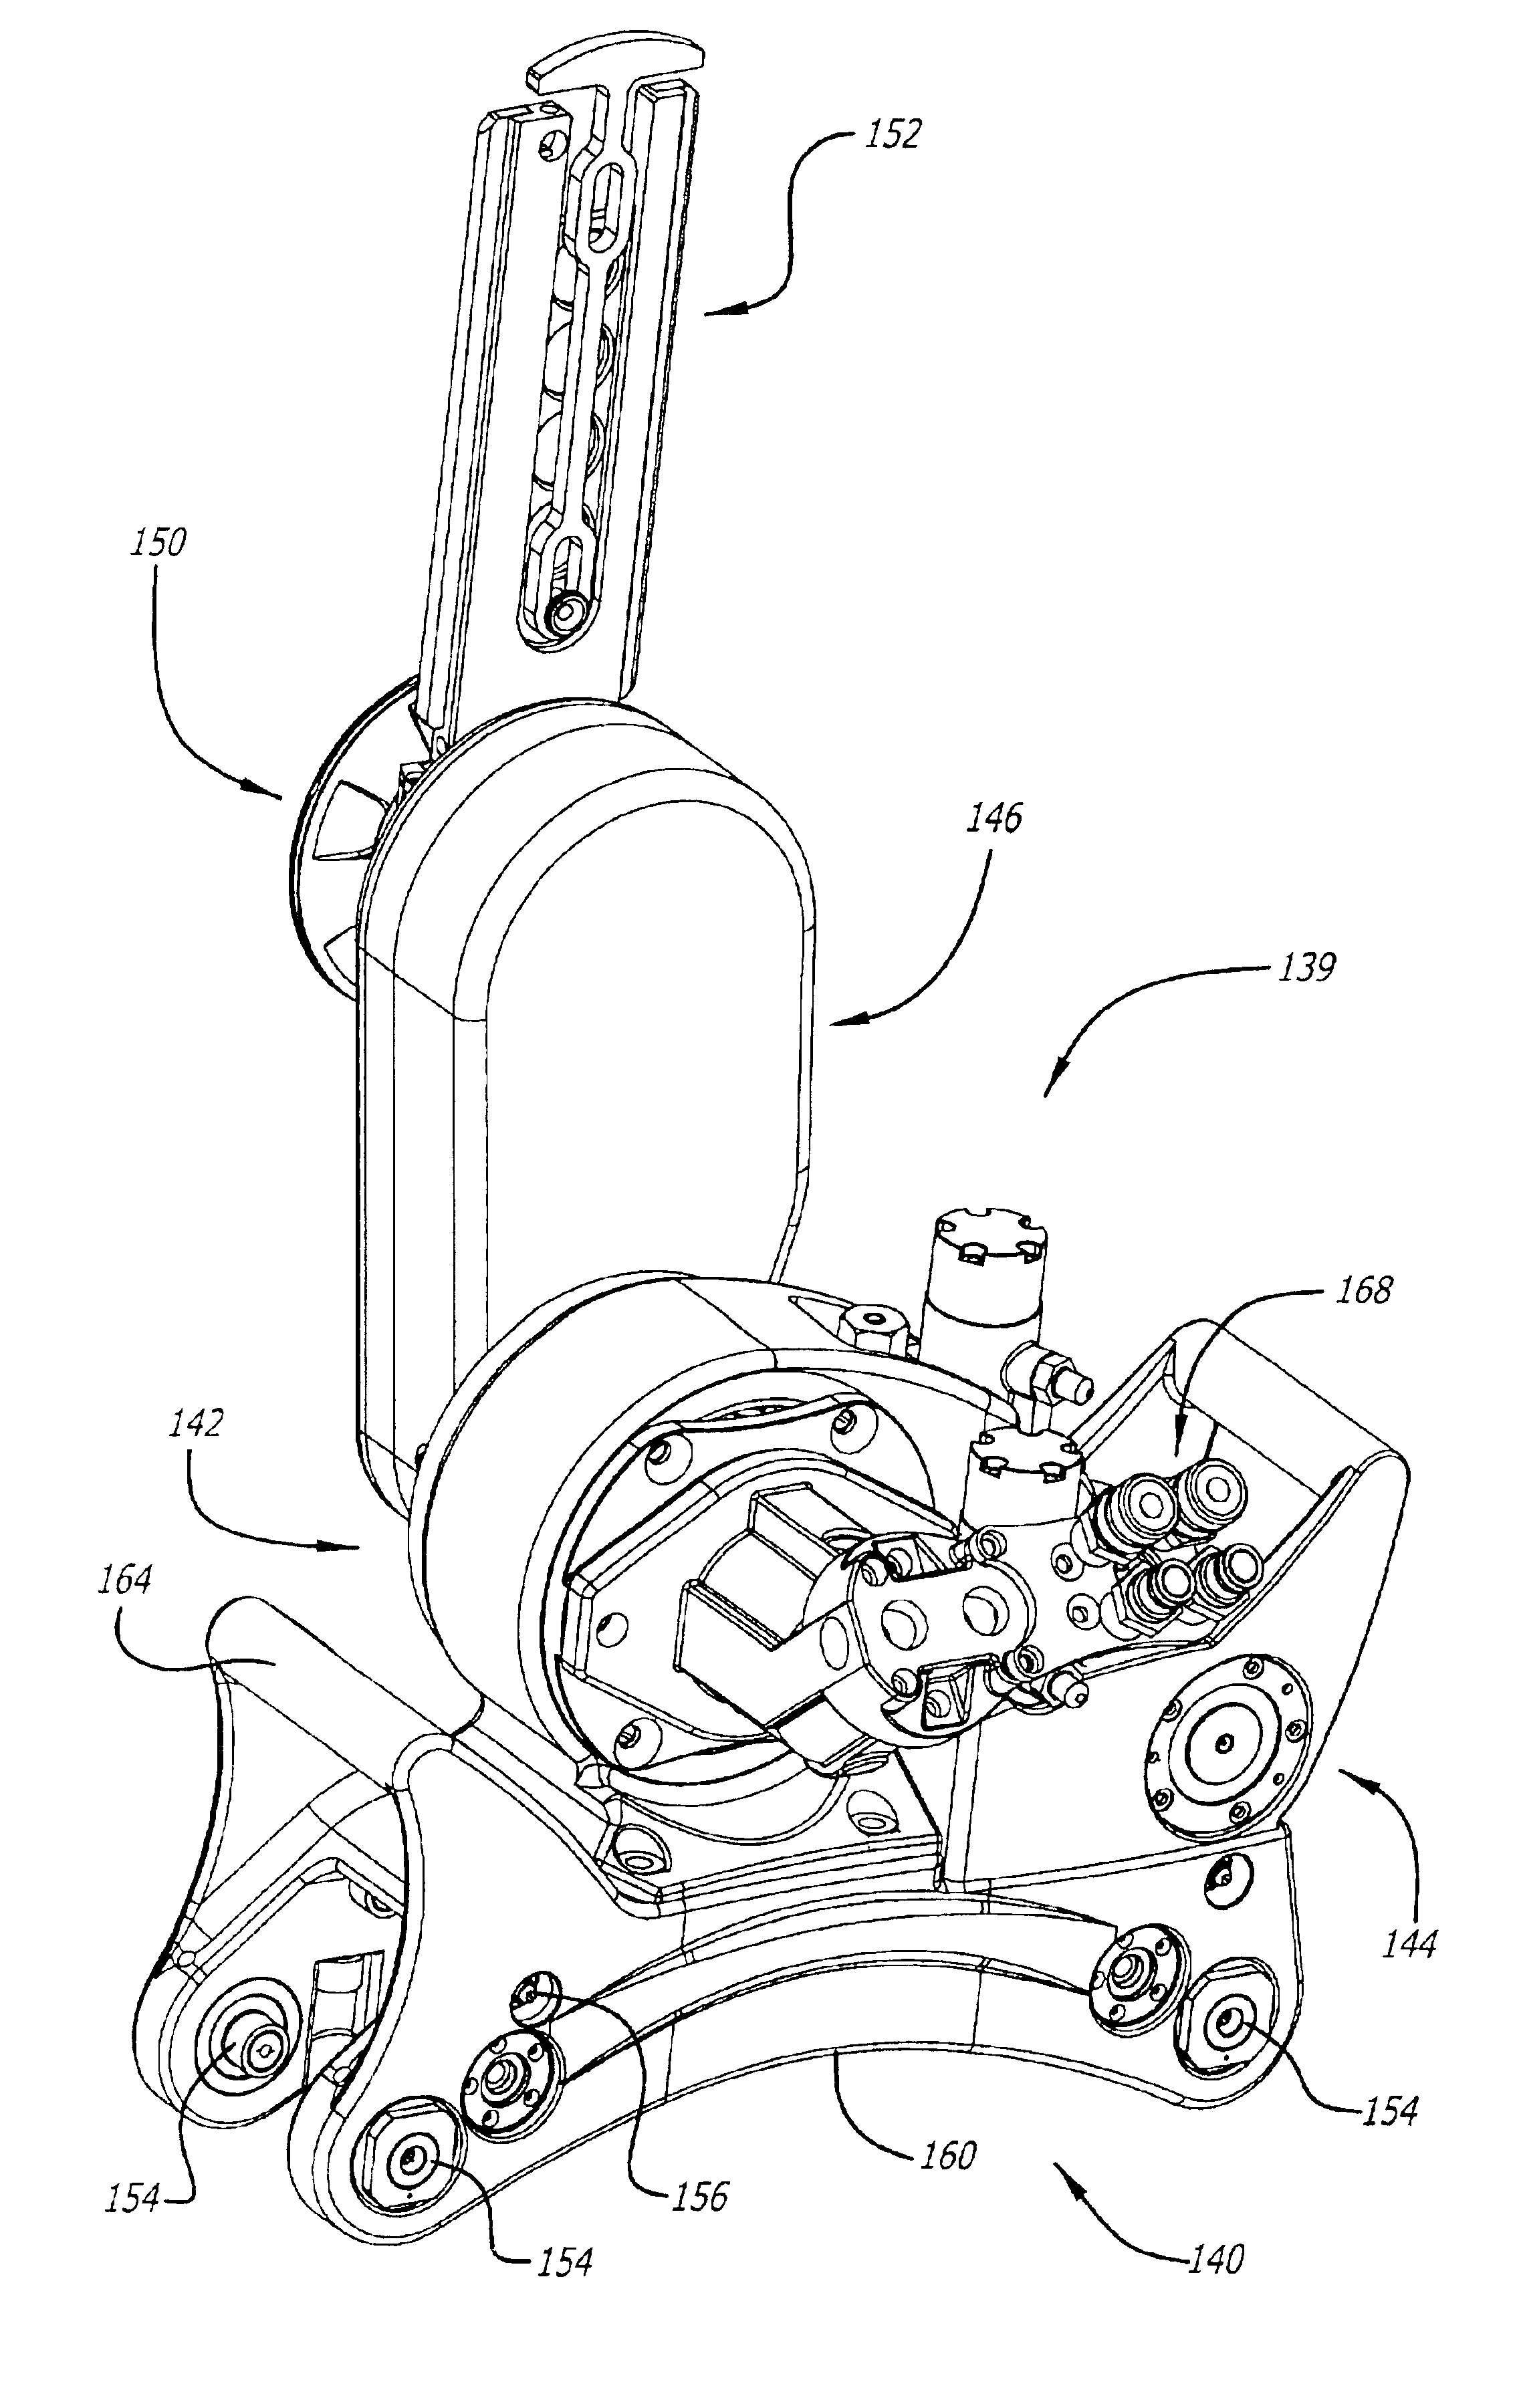 Pavement working apparatus and methods of making